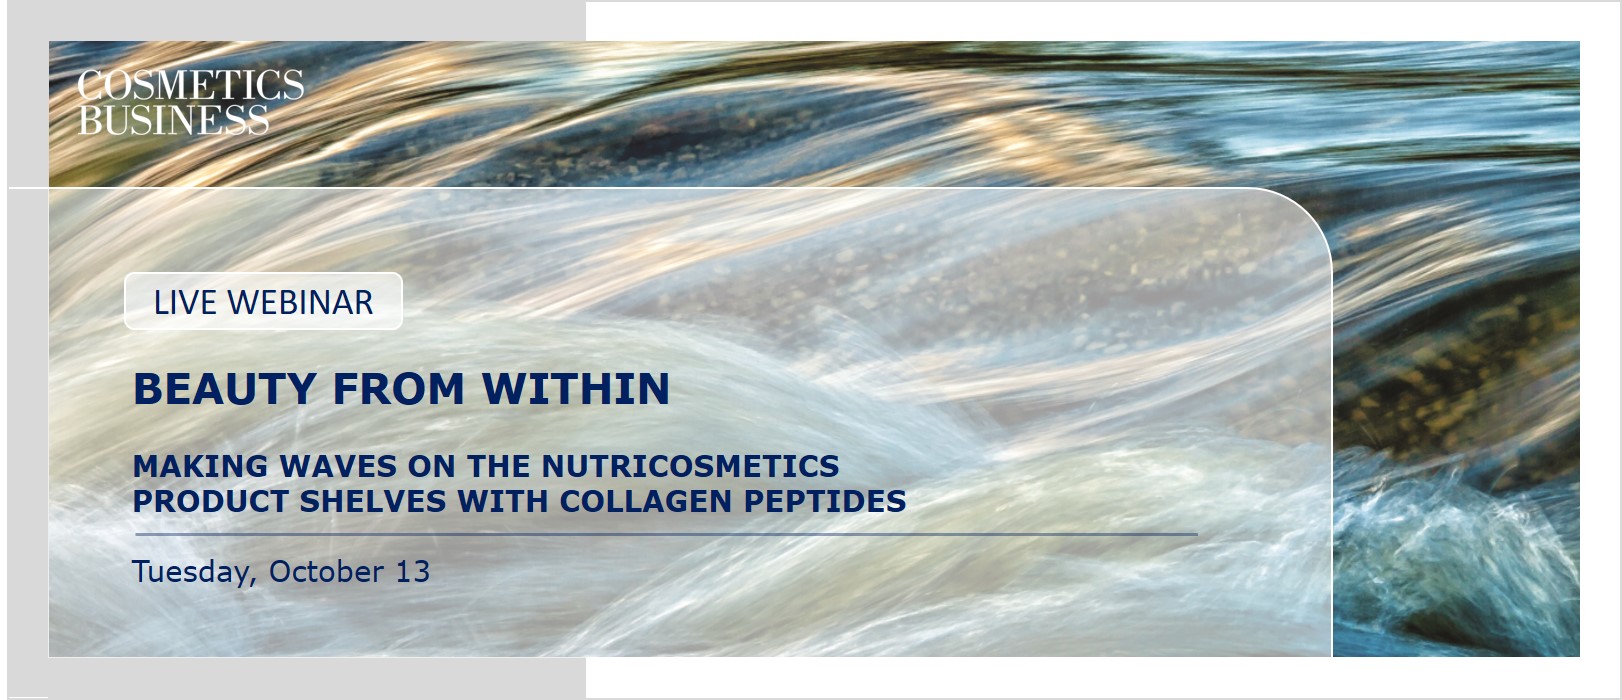 Webinar: Making waves on the nutricosmetics product shelves with collagen peptides
